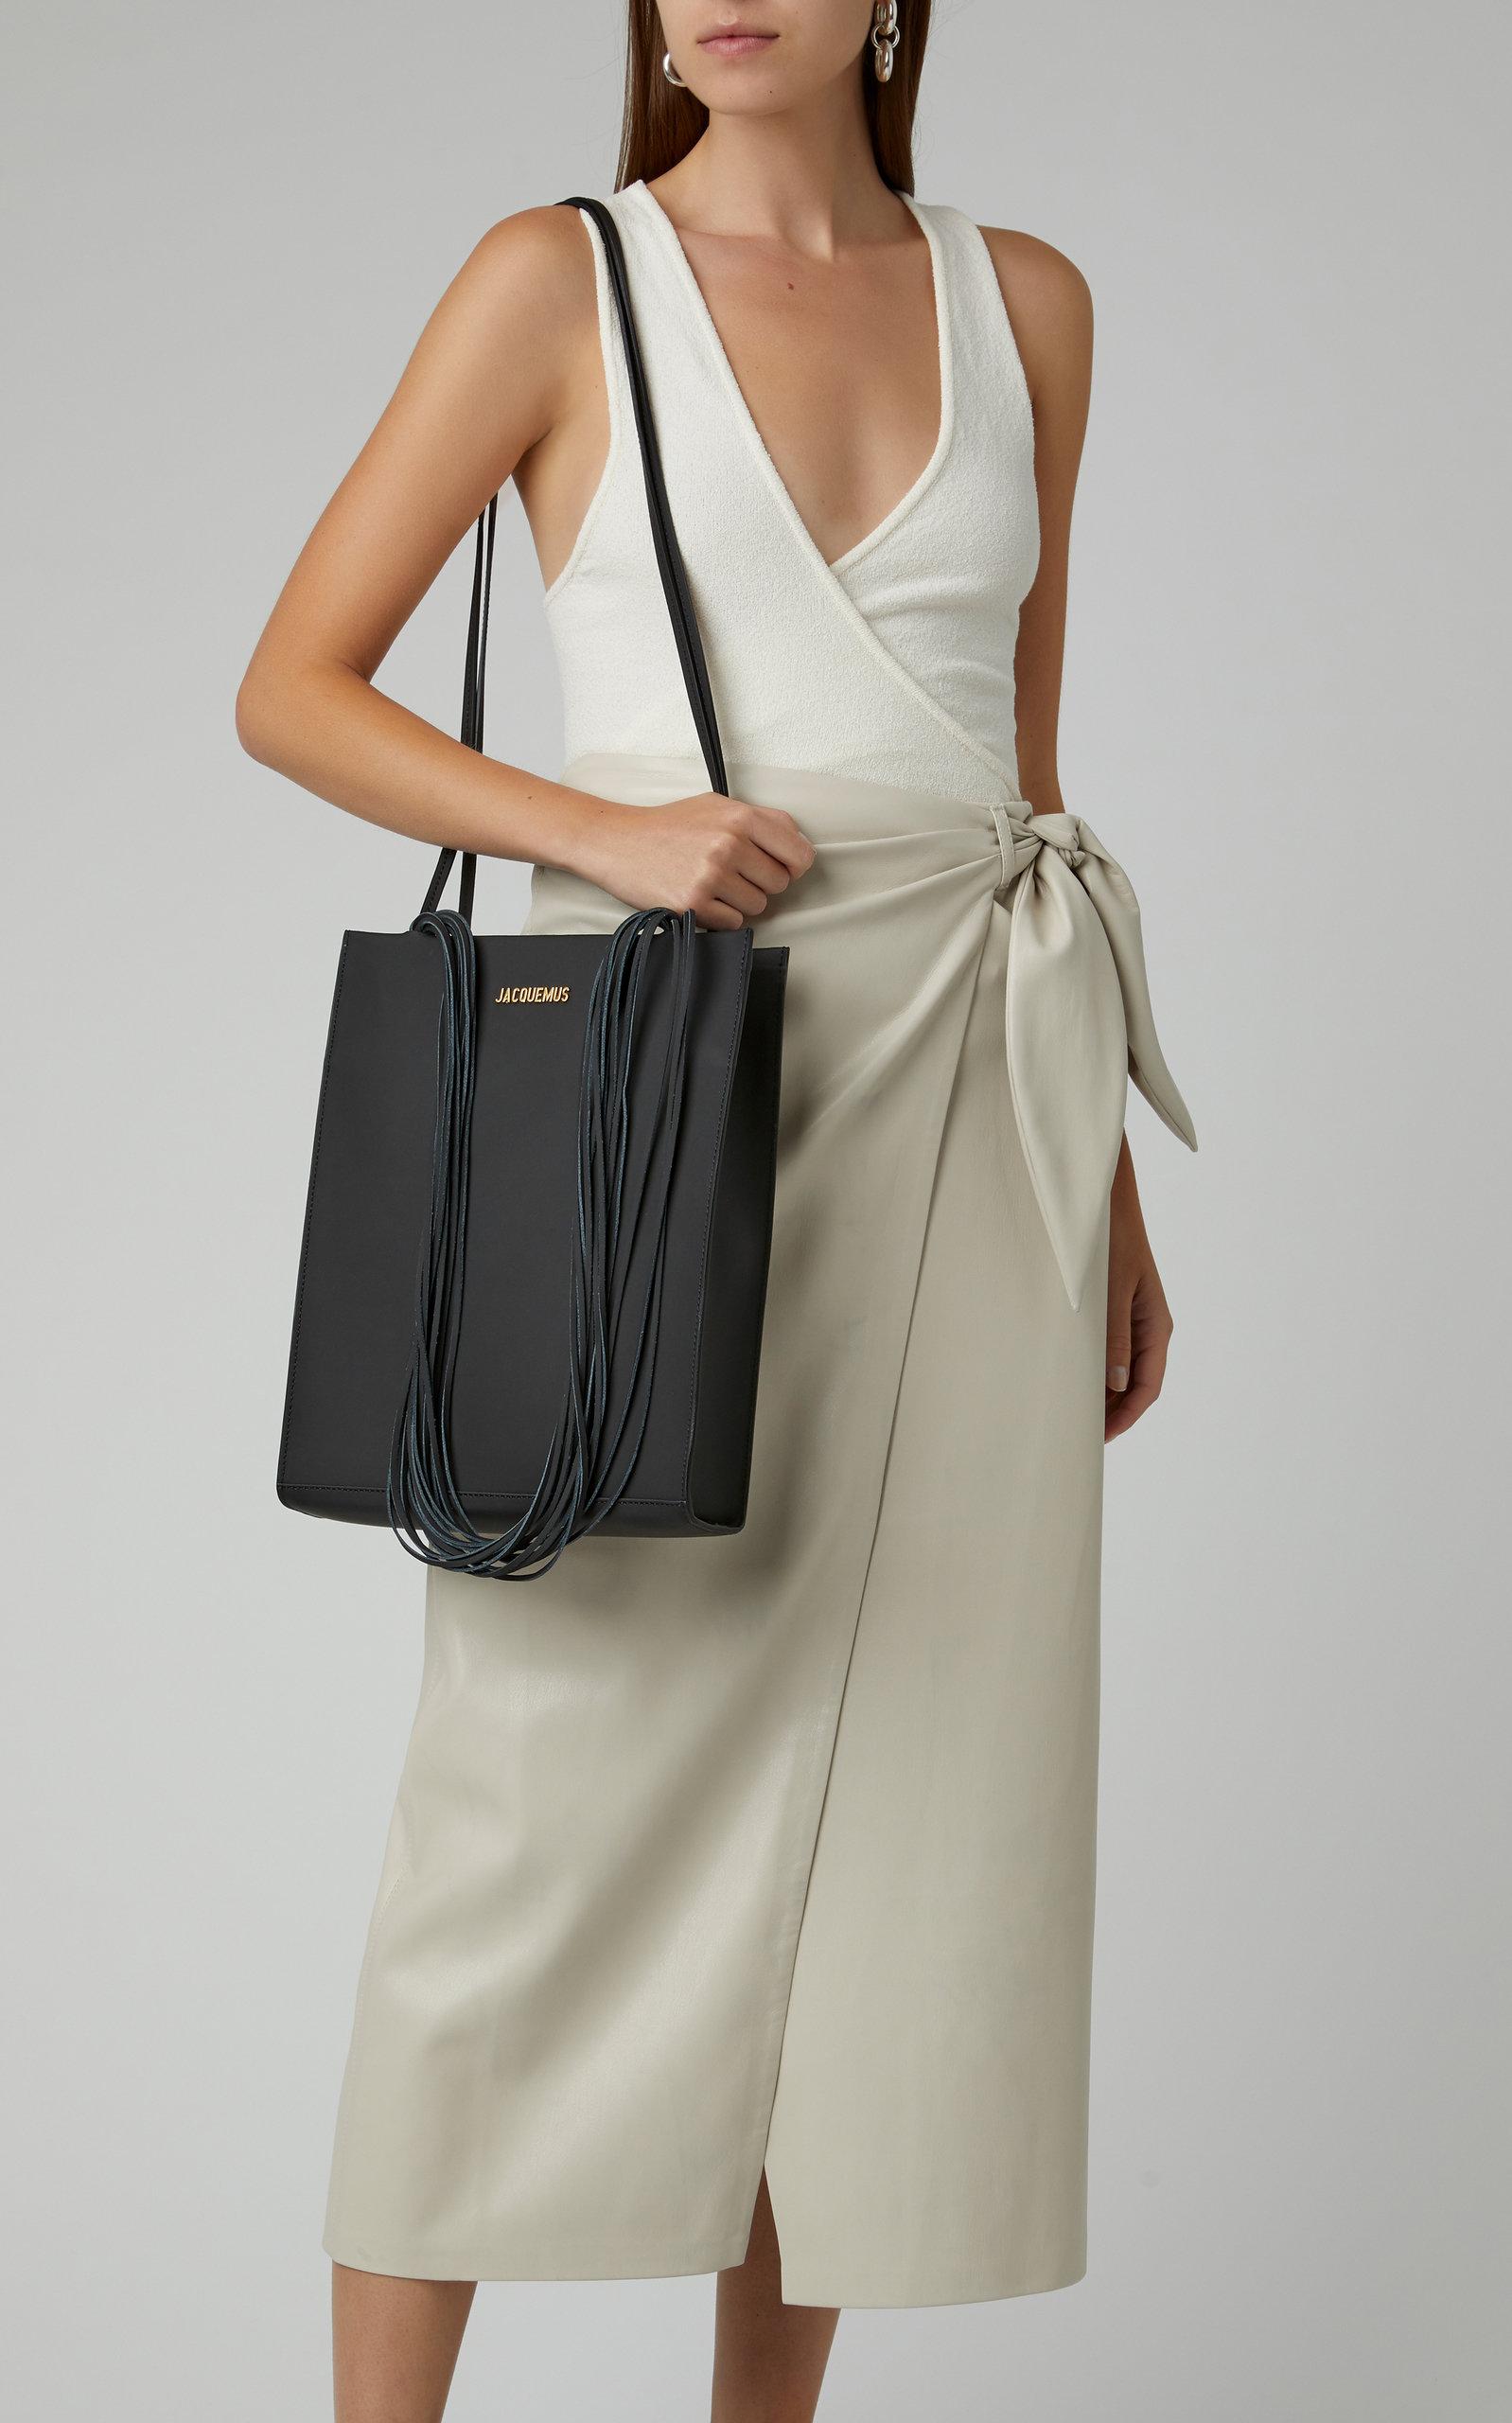 JACQUEMUS LE A4 TOTE IN OFF-WHITE WITH DUST BAG MADE IN PORTUGAL ...